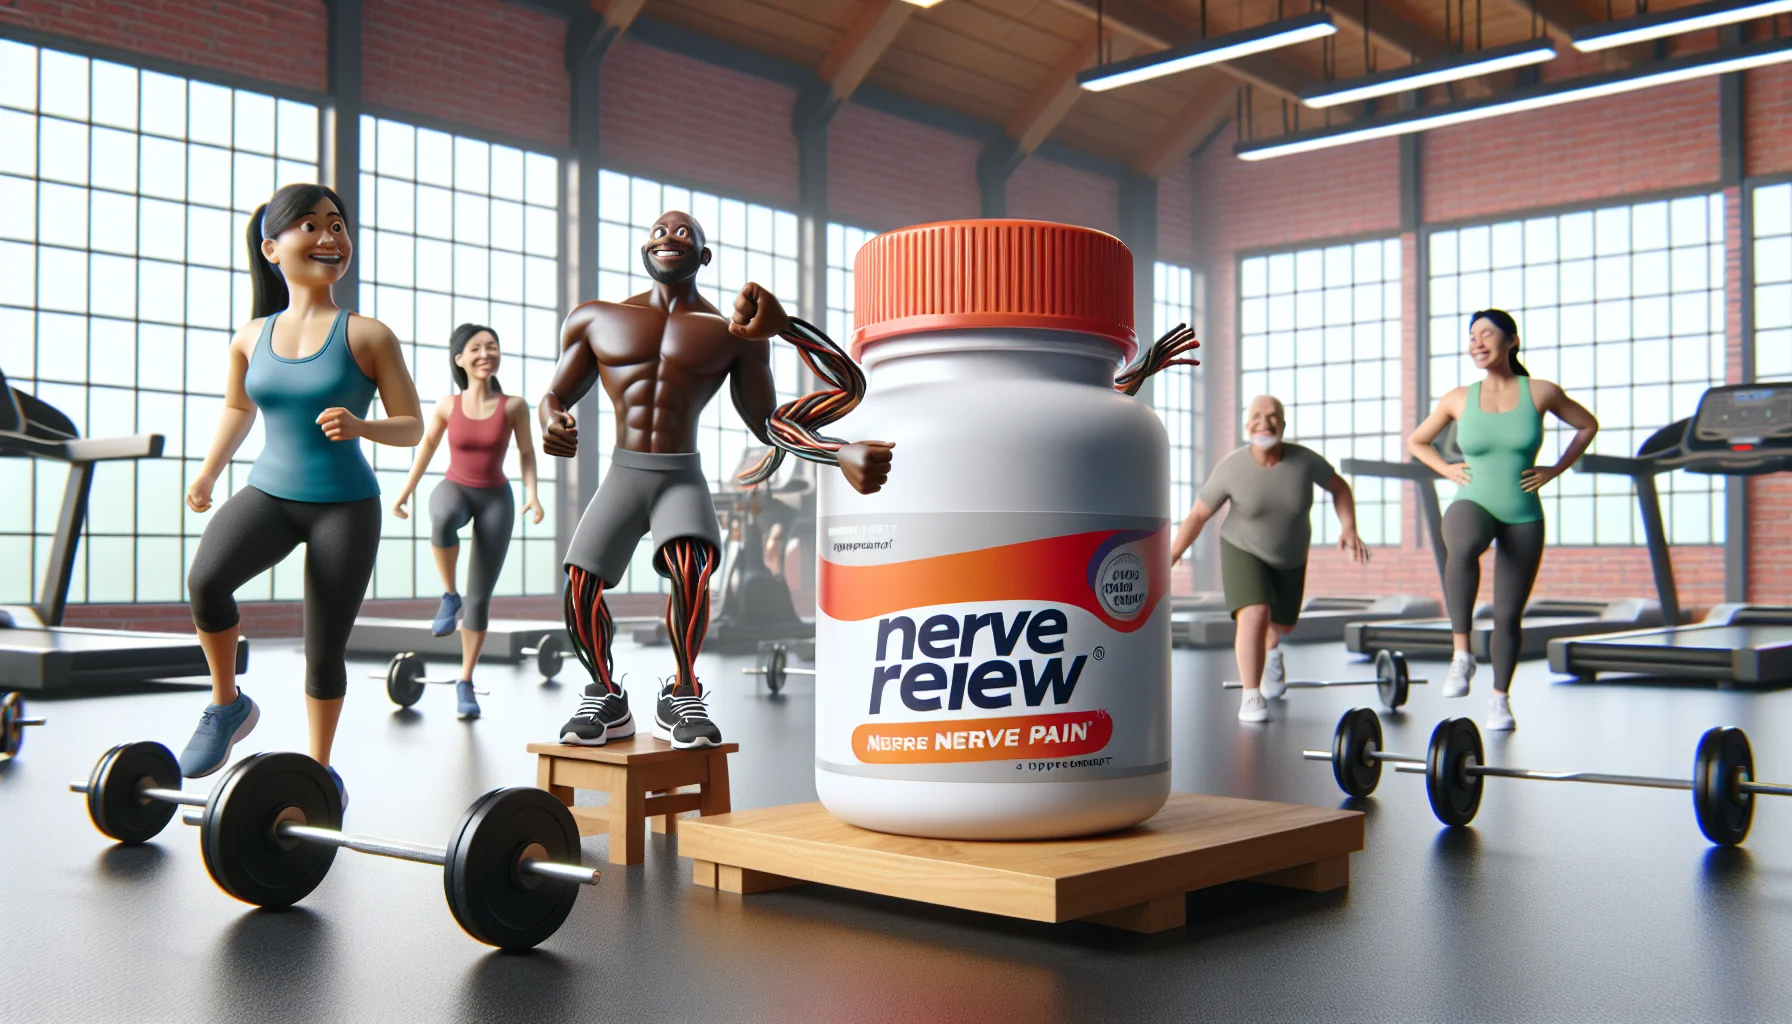 Generate a humorous and realistic image where the Nerve Renew supplement product for tackling nerve pain is given a spotlight. The scene is set in a lively gym, where people of different descents and genders - a Hispanic woman, a Black man, an Asian man, and a Middle-Eastern woman are engaged in various fitness activities. The animated Nerve Renew bottle is shown with tiny arms and legs, funnily trying to motivate and coach the people in the gym to perform their exercises. The lively environment represents the efficiency of the product in aiding people in their fitness journey.